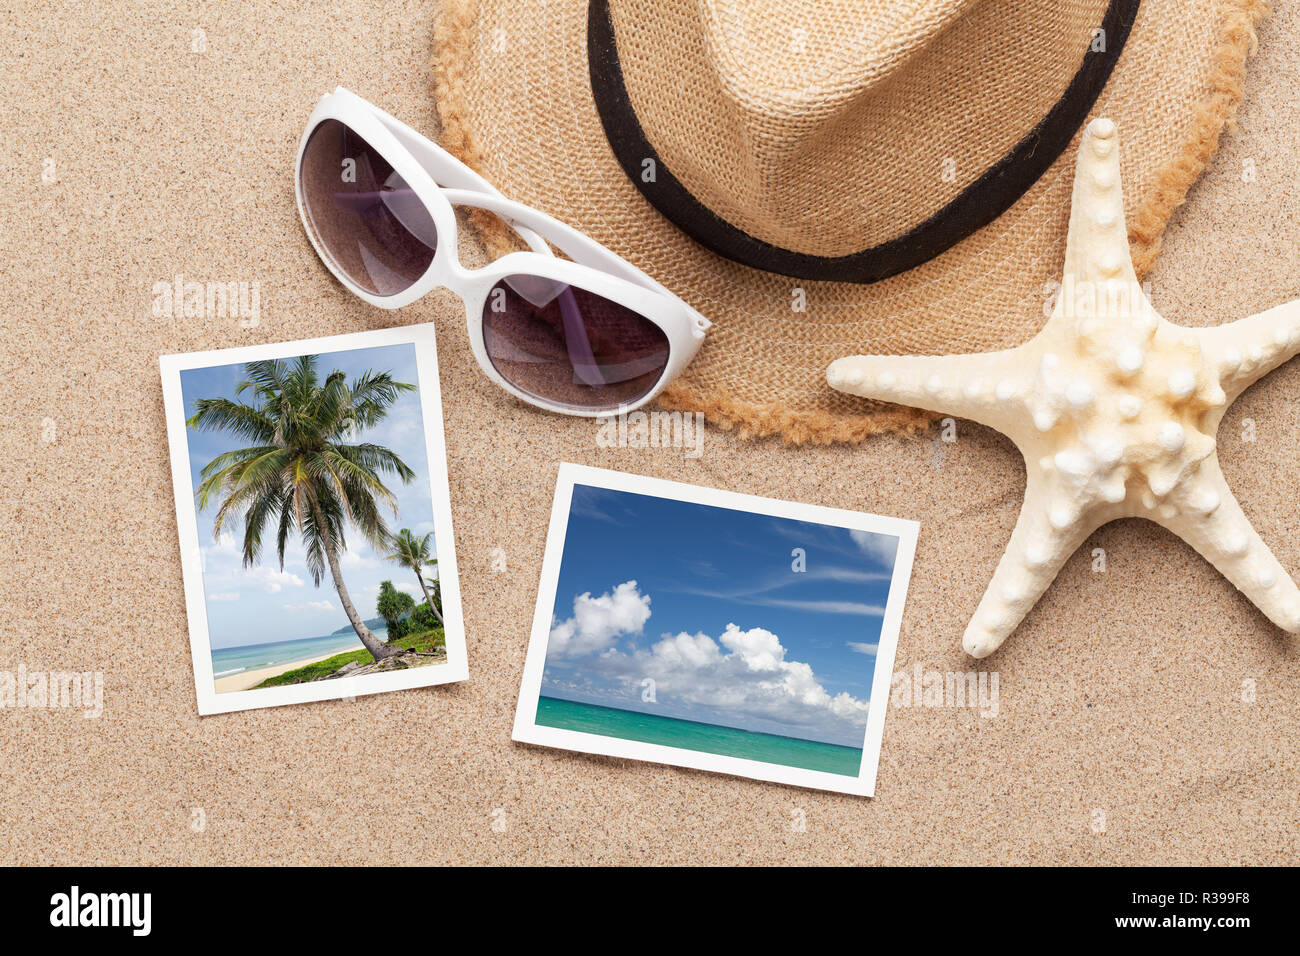 Travel vacation concept with hat, sunglasses, seashells and photos on sand backdrop. Top view with copy space. Flat lay. All photos taken by me Stock Photo